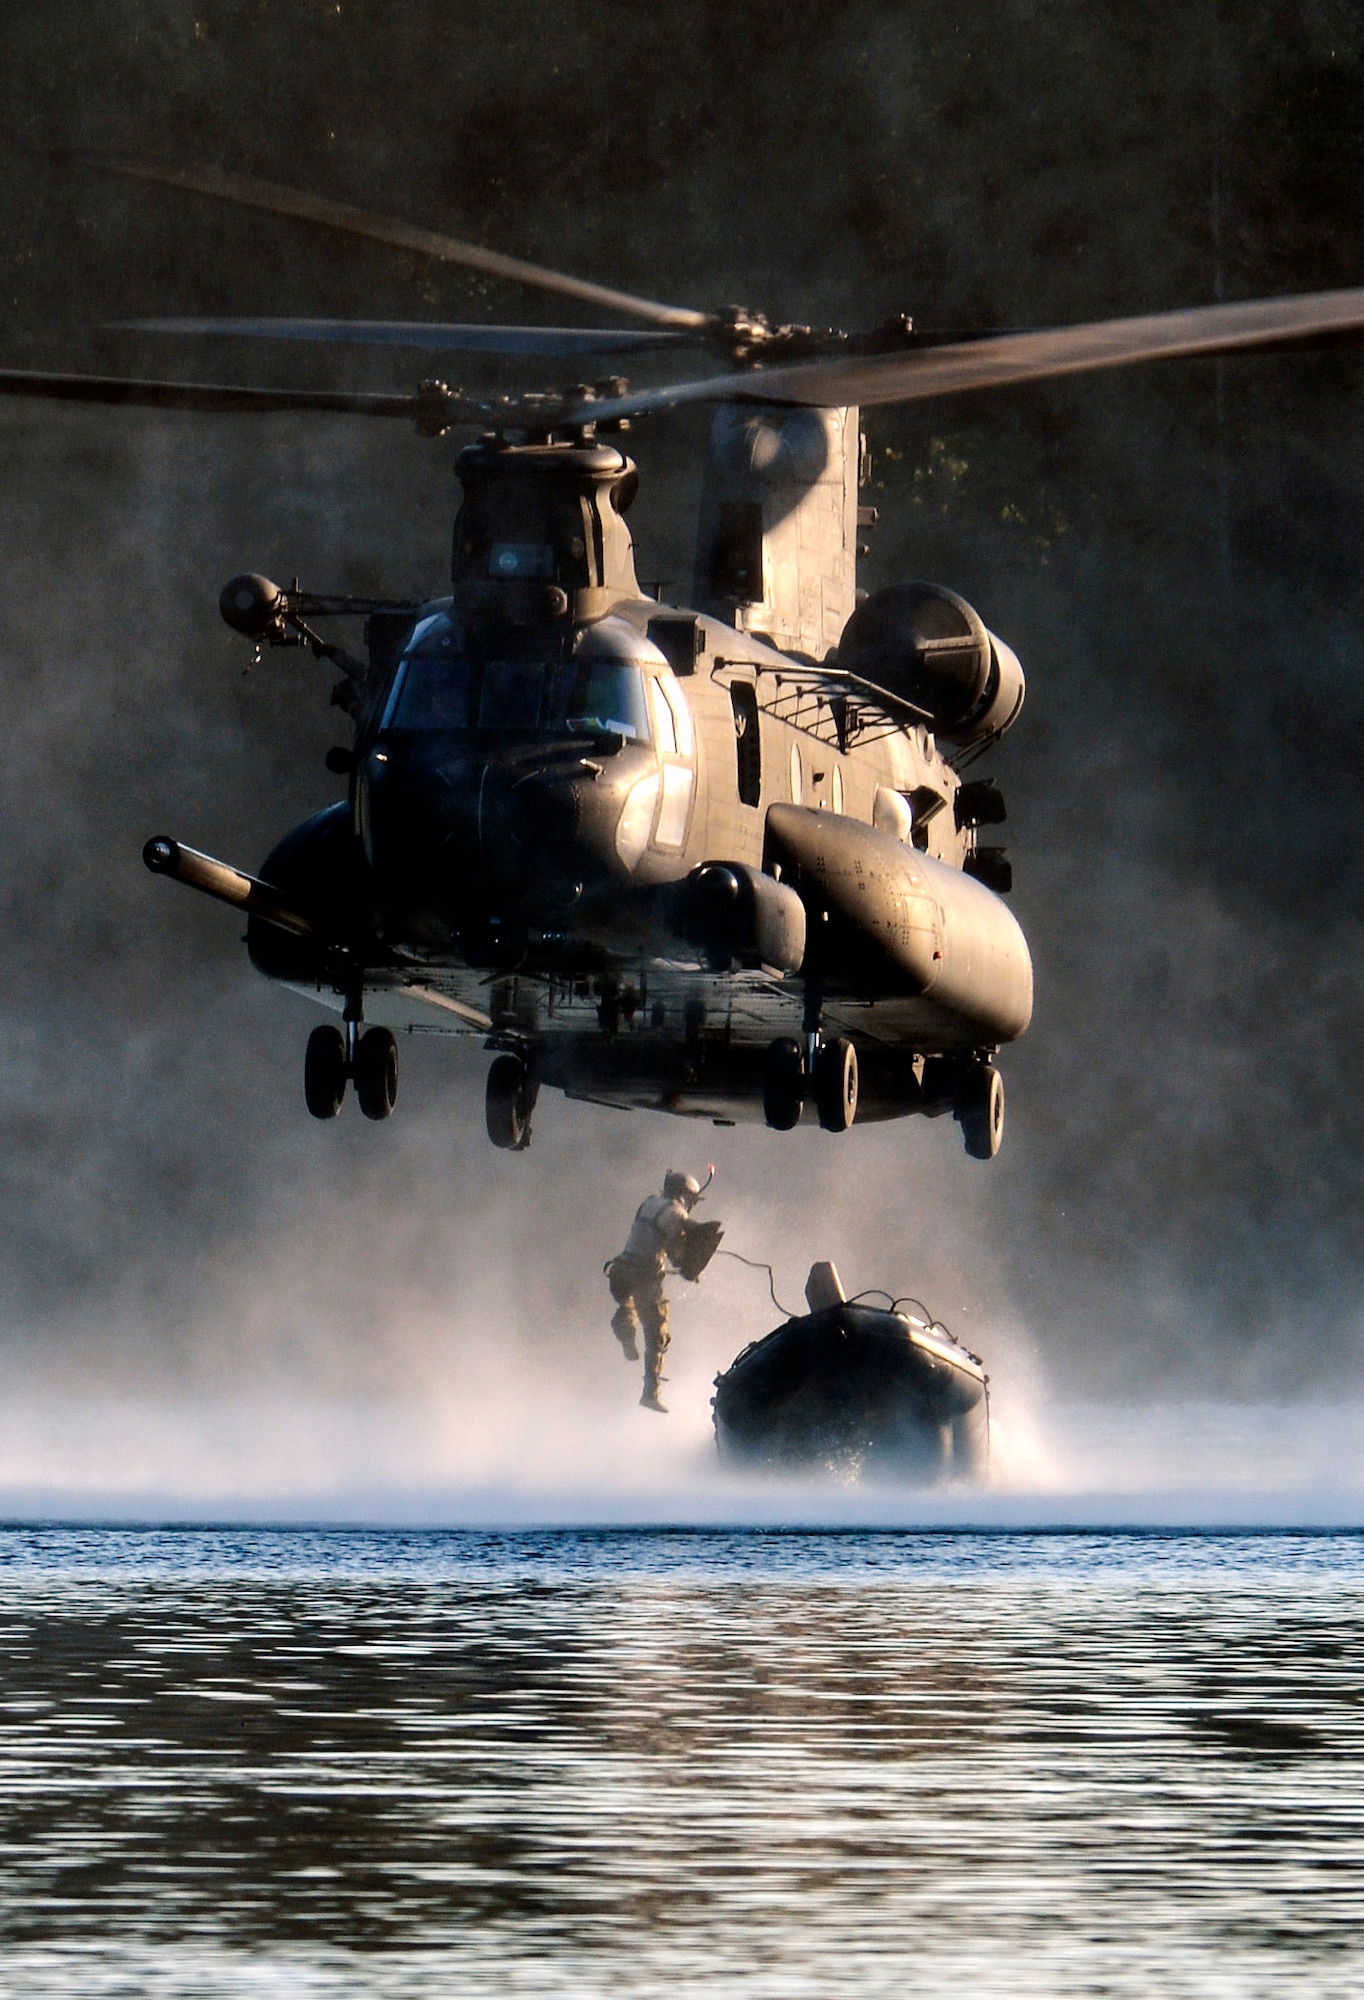 An Airman jumps out of an MH-47 Chinook helicopter during helocast alternate insertion and extraction training with Soldiers from the 160th Special Operations Aviation Regiment July 14, 2014, at American Lake on Joint Base Lewis-McChord, Wash. The Airmen from the 22nd Special Tactics Squadron conducted 10 daytime helocast iterations and eight nighttime helocast iterations over a two-day span. The Airman is assigned to the 22nd STS’ Red Team. (U.S. Air Force photo/Staff Sgt. Russ Jackson)